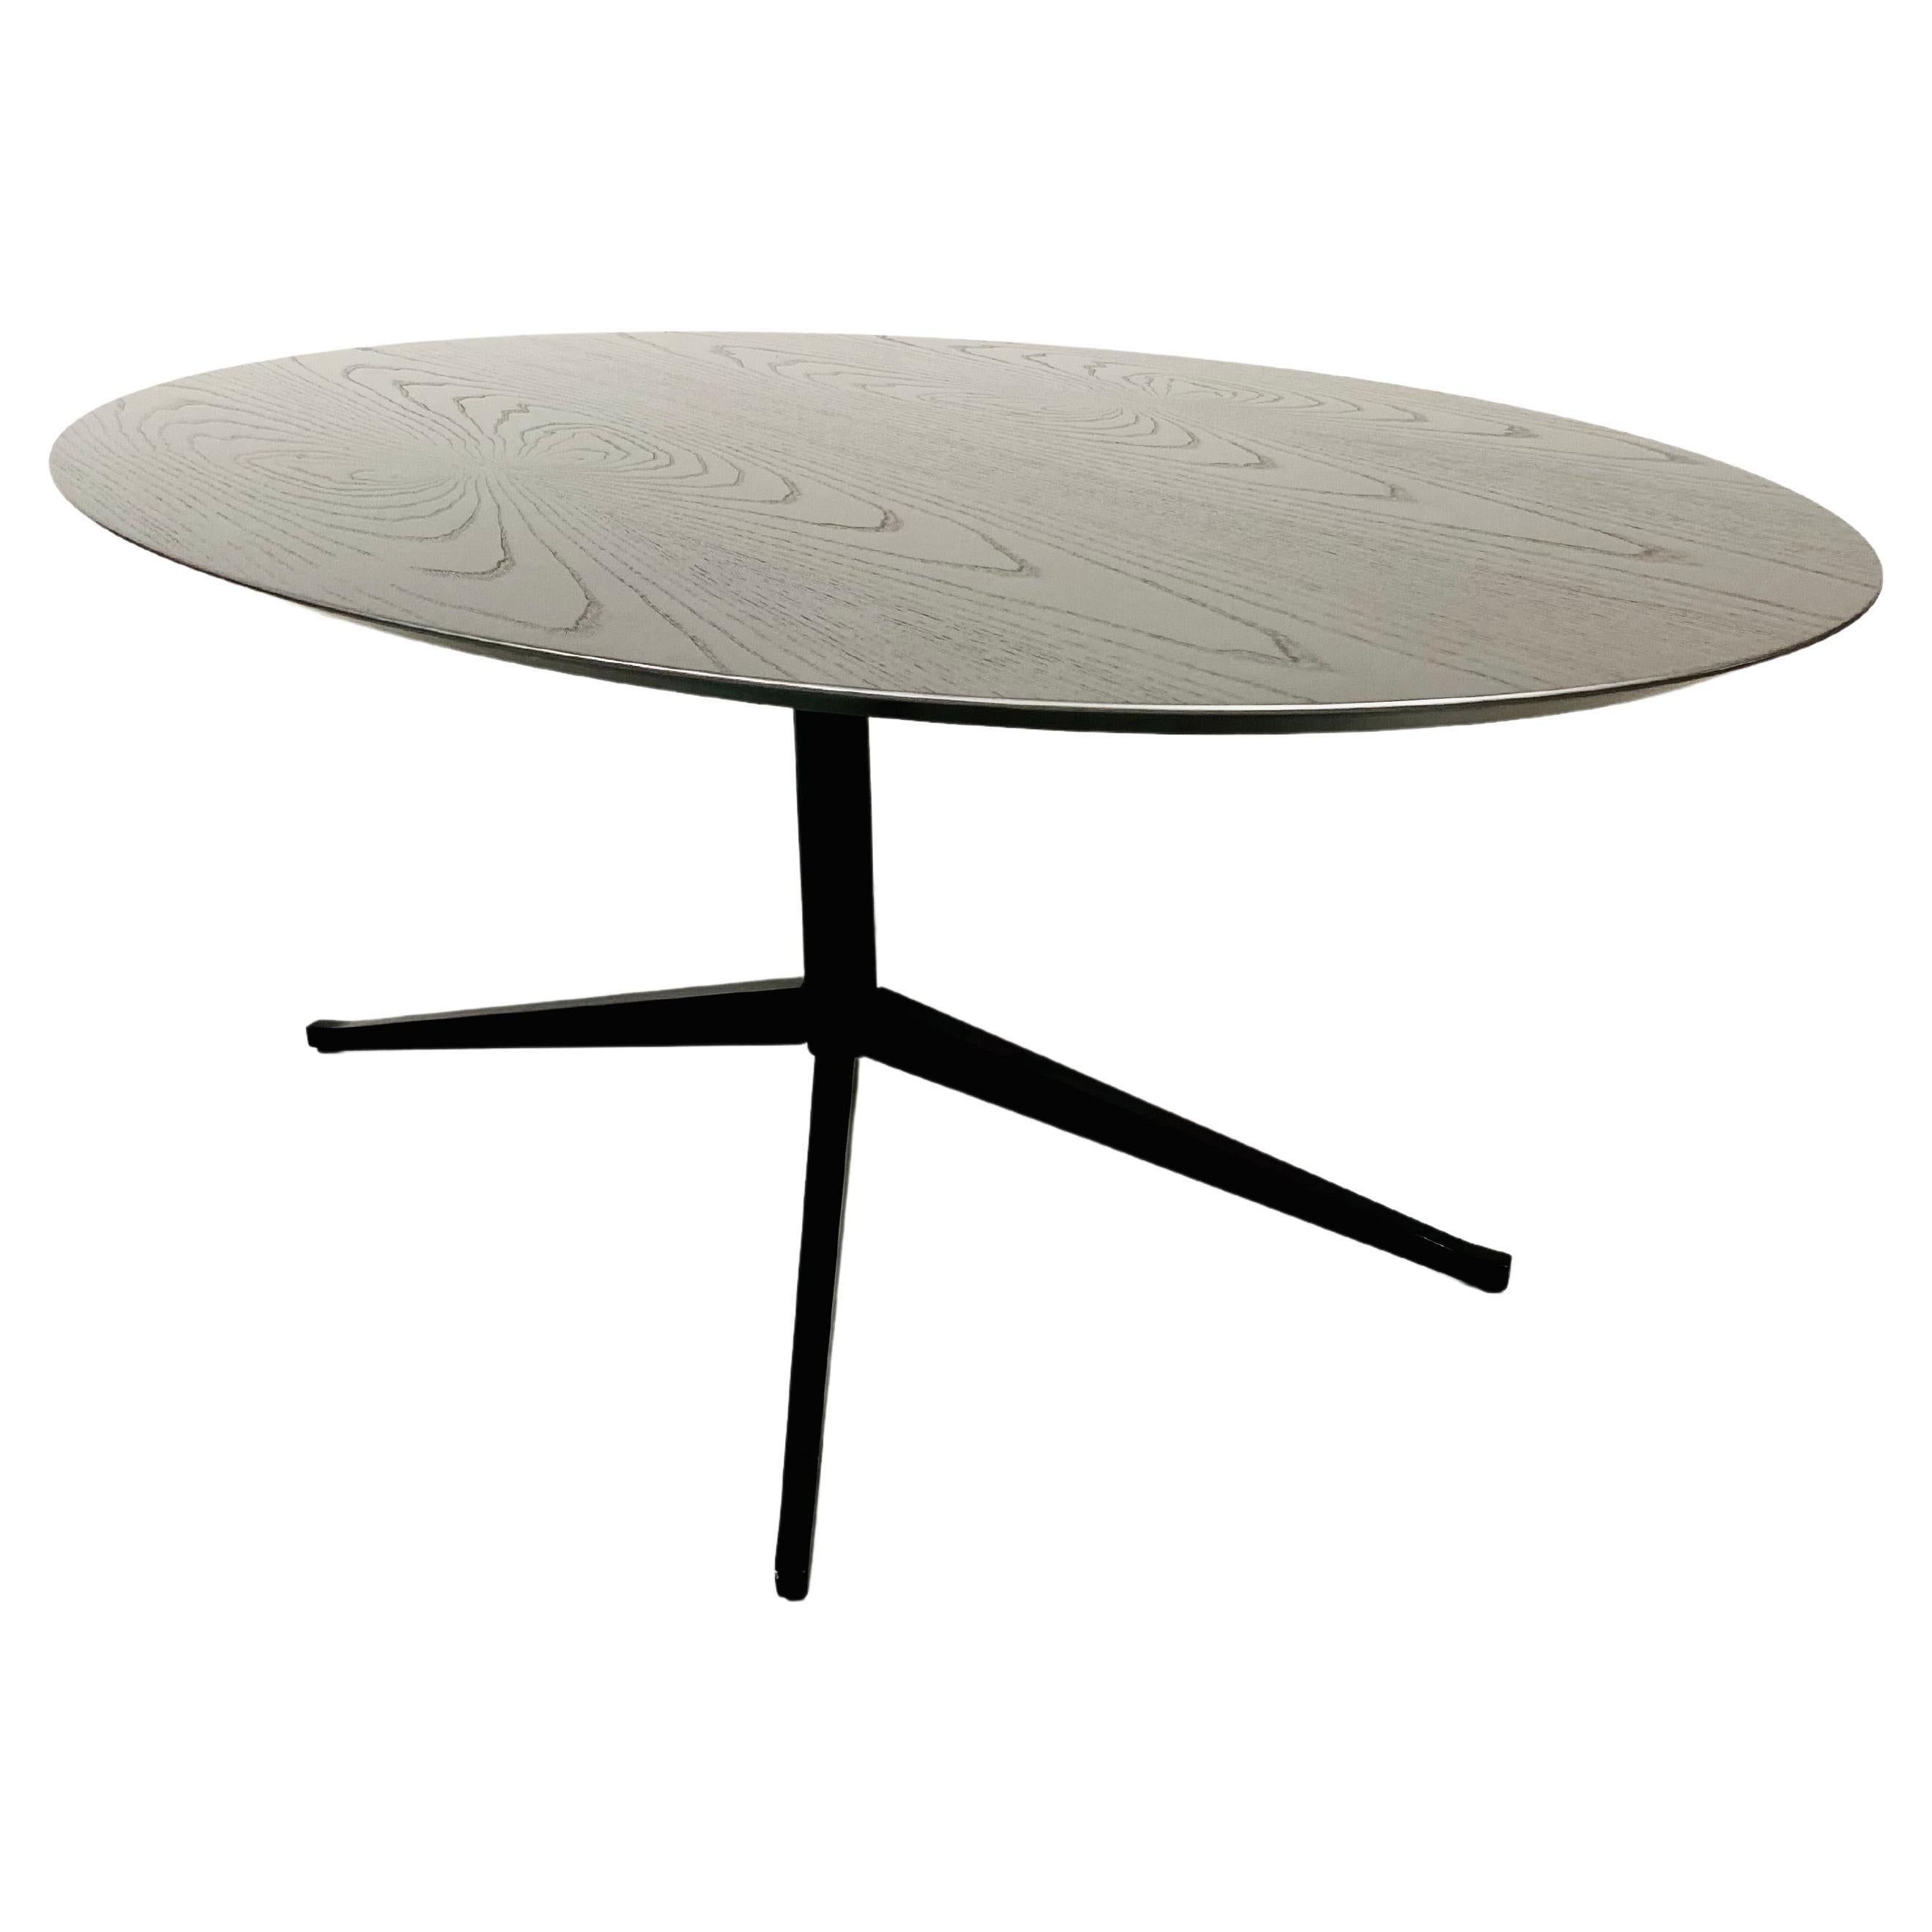 Mid-20th Century Mid-Century Modern Florence Knoll, Model 2480 Oval Table Desk, 1960s For Sale